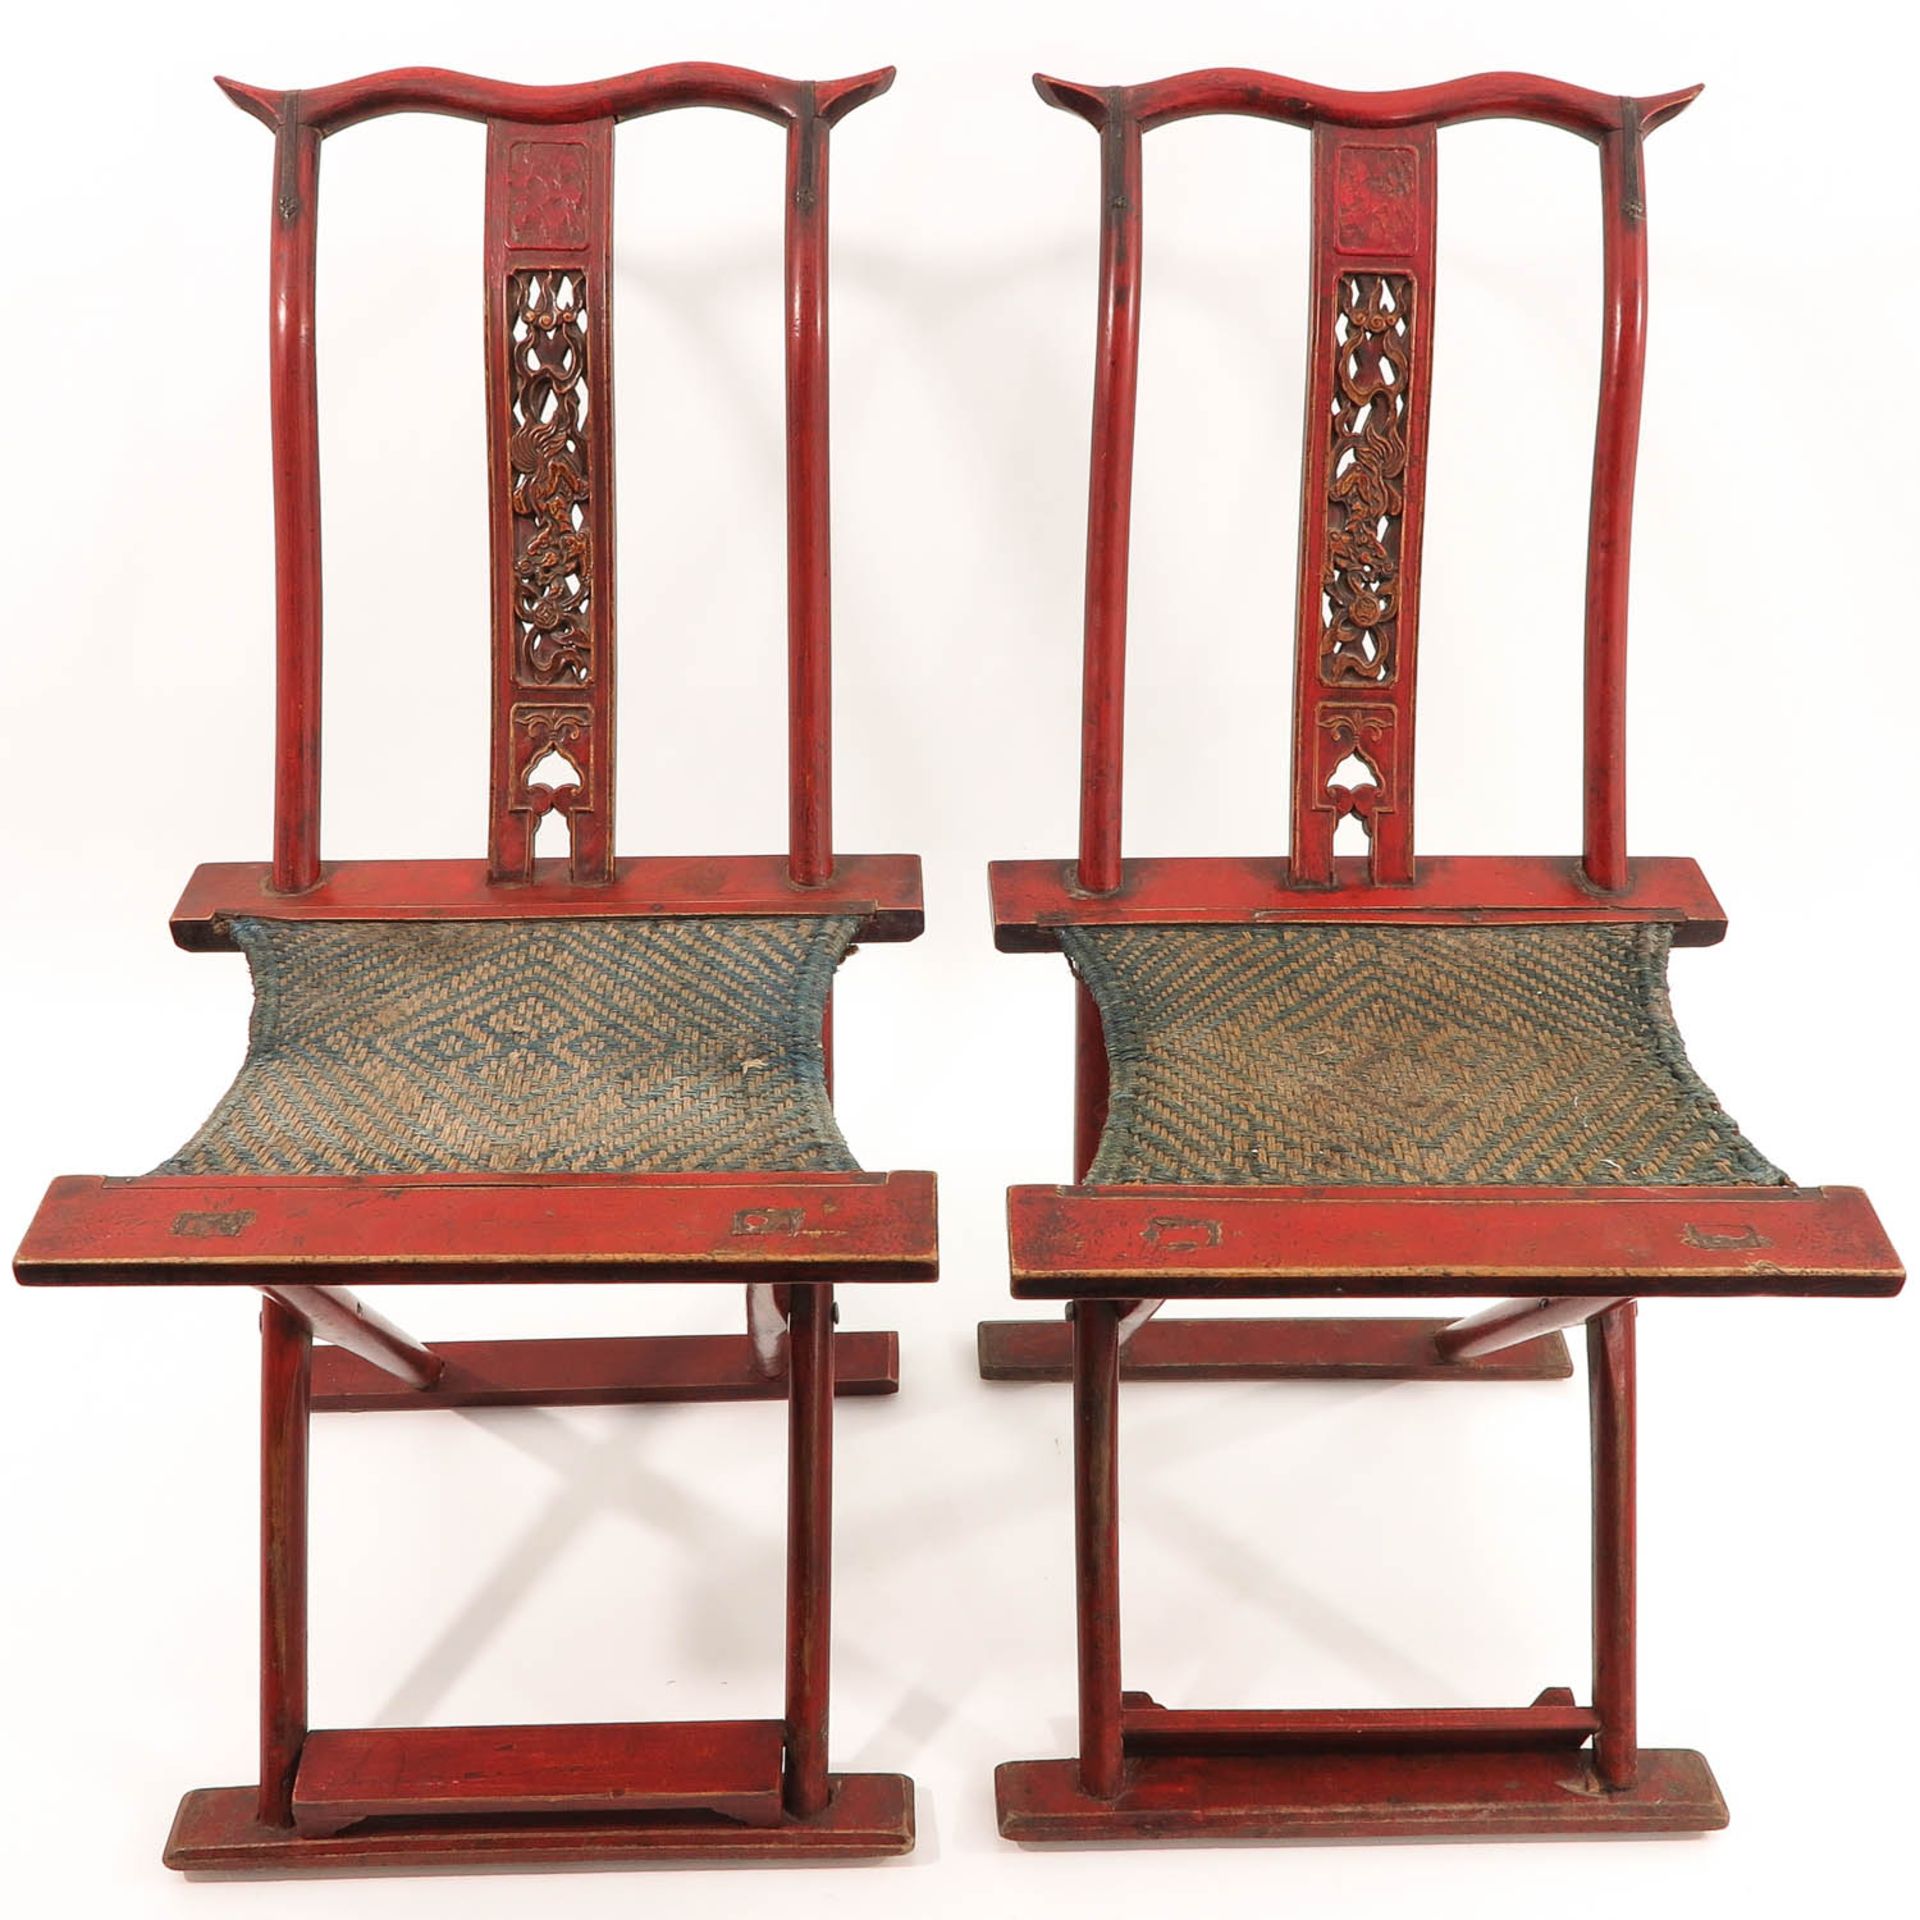 A Pair of Chinese Folding Chairs - Image 5 of 9